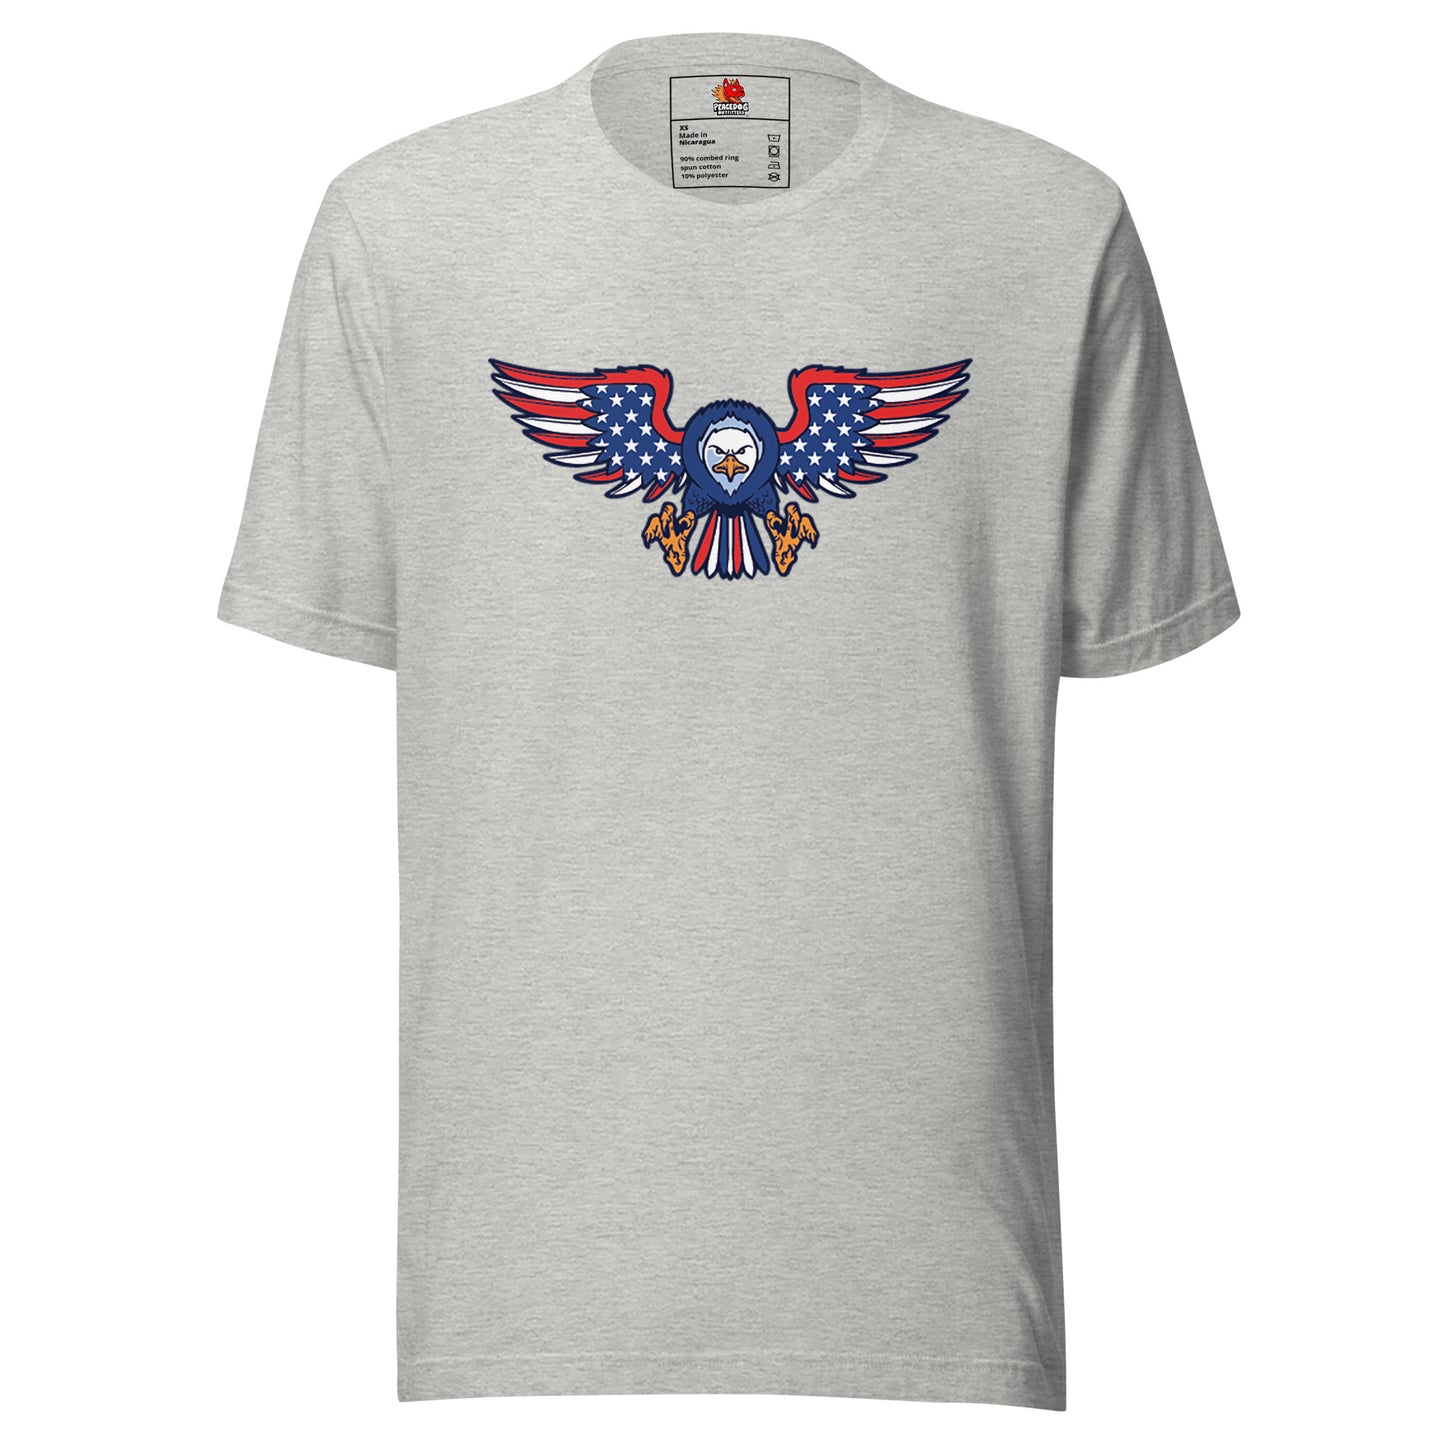 Eagle outstretched T-shirt